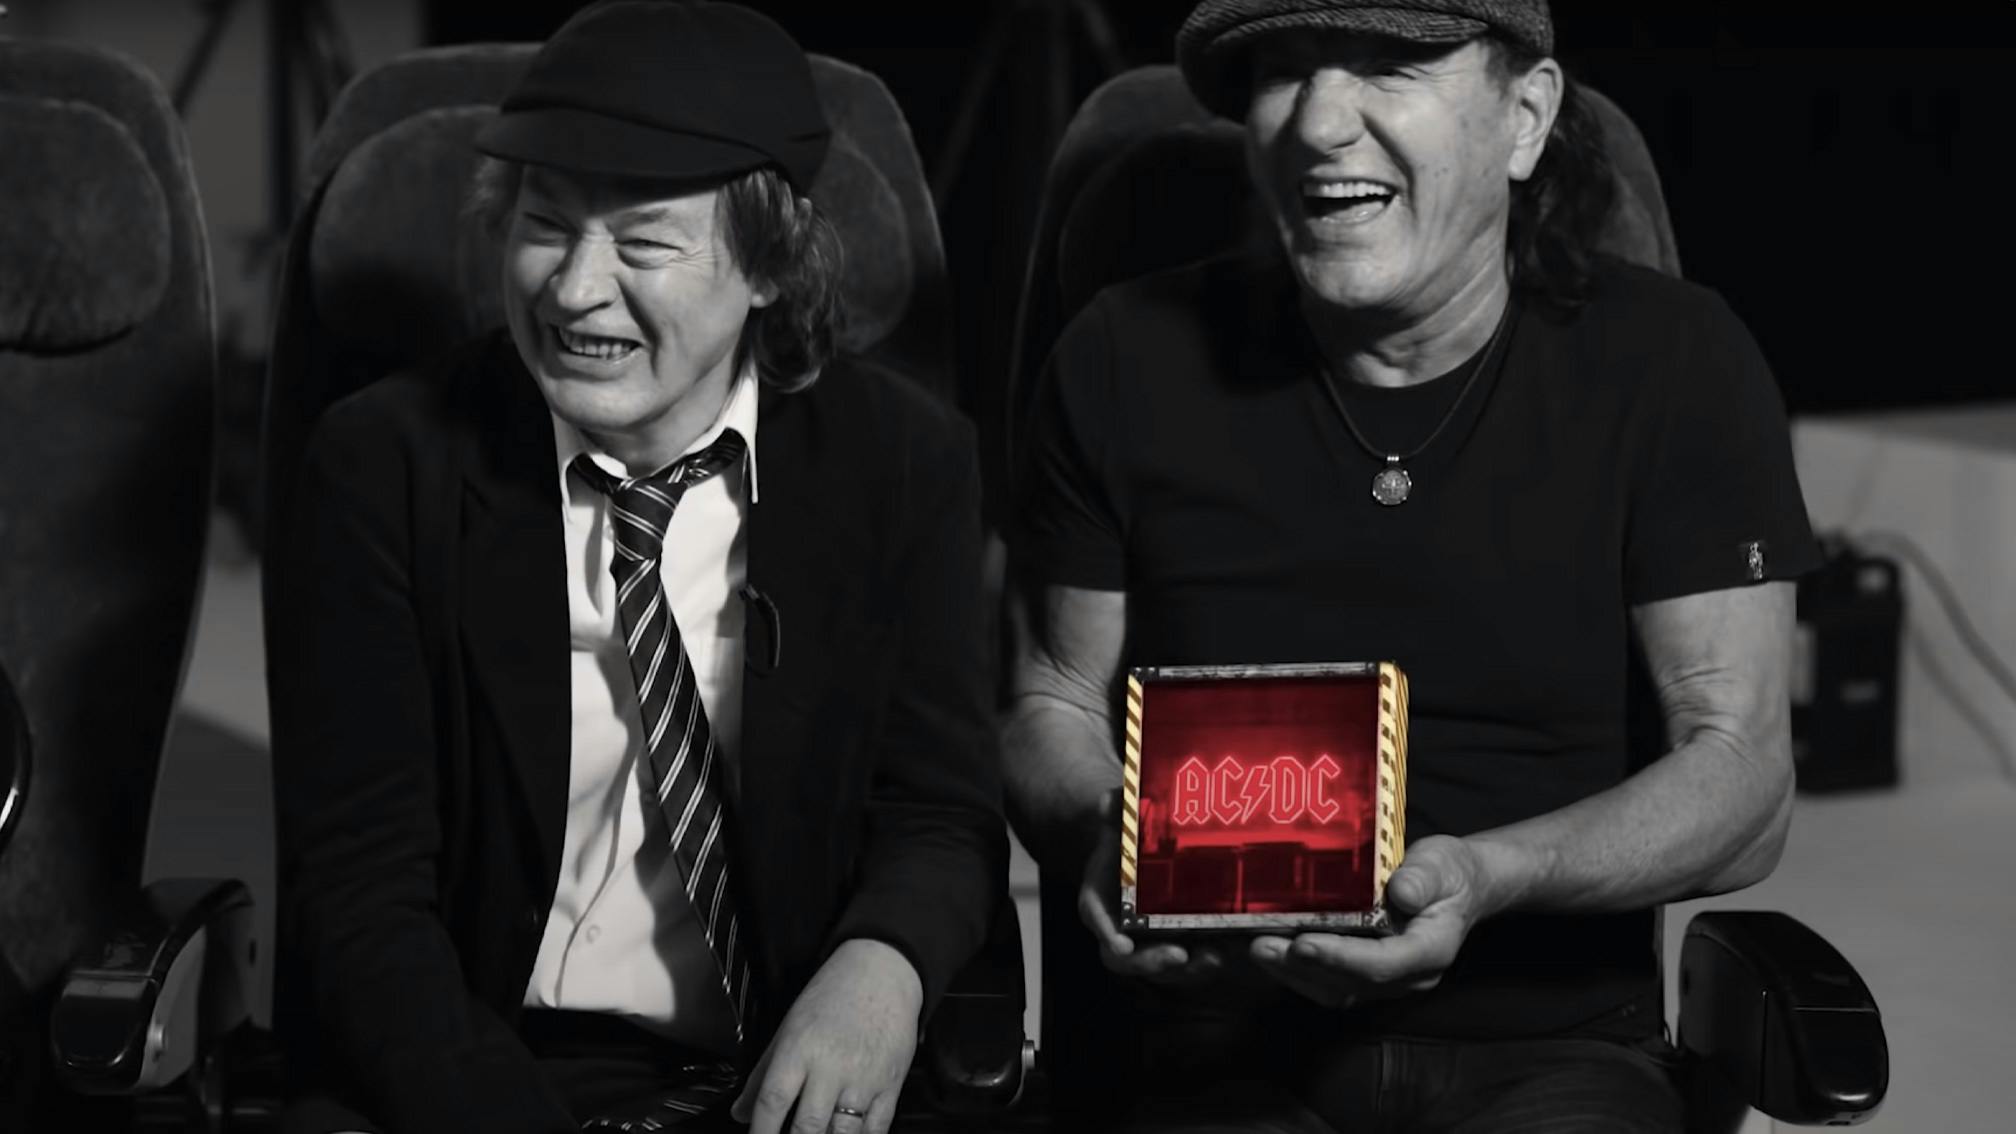 AC/DC: The First Look At The Deluxe Lightbox Edition Of POWER UP